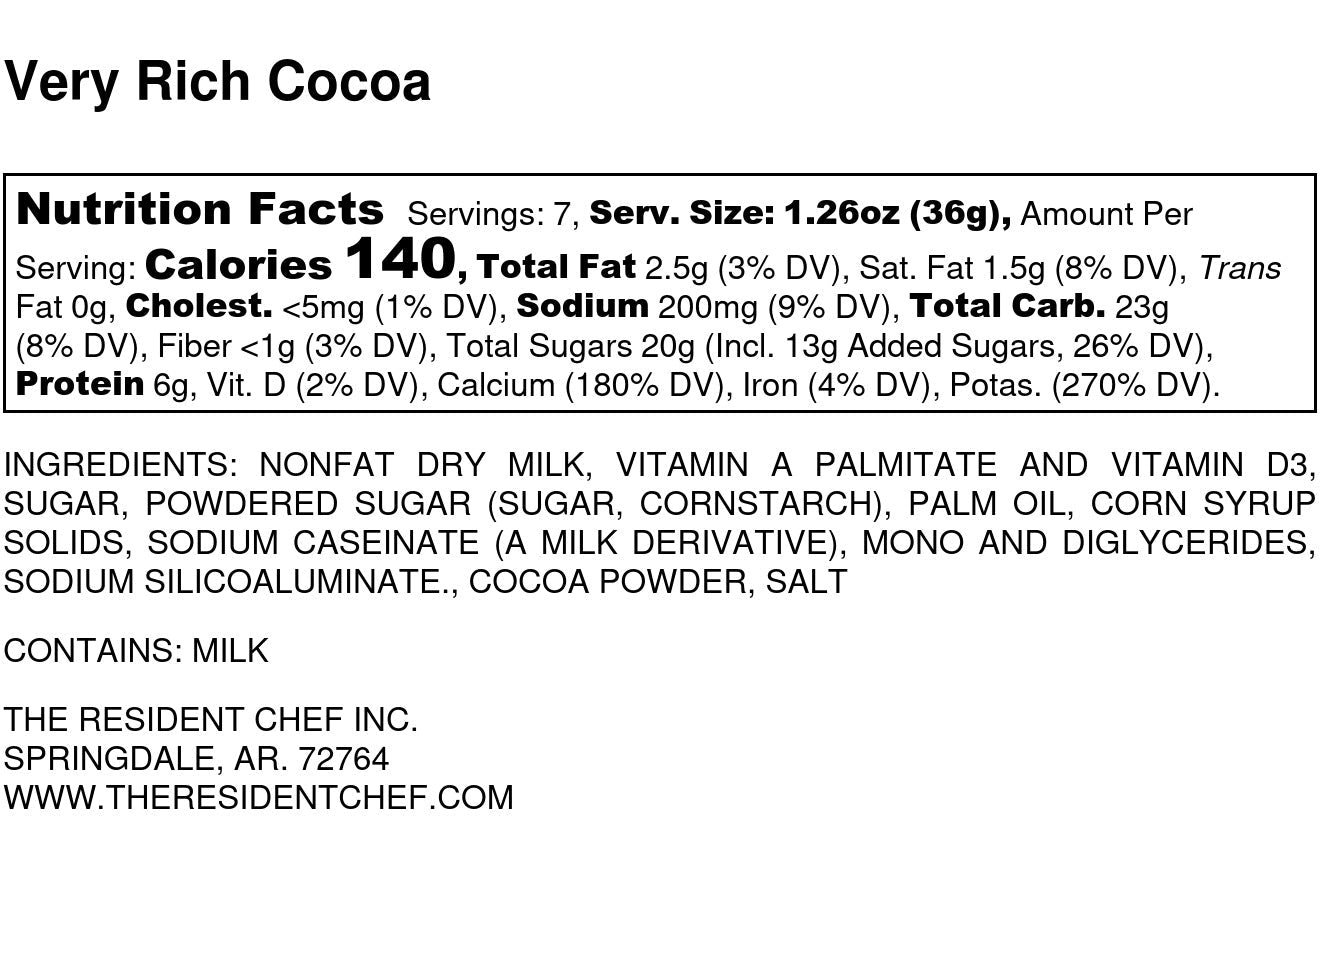 Very Rich Cocoa Mix